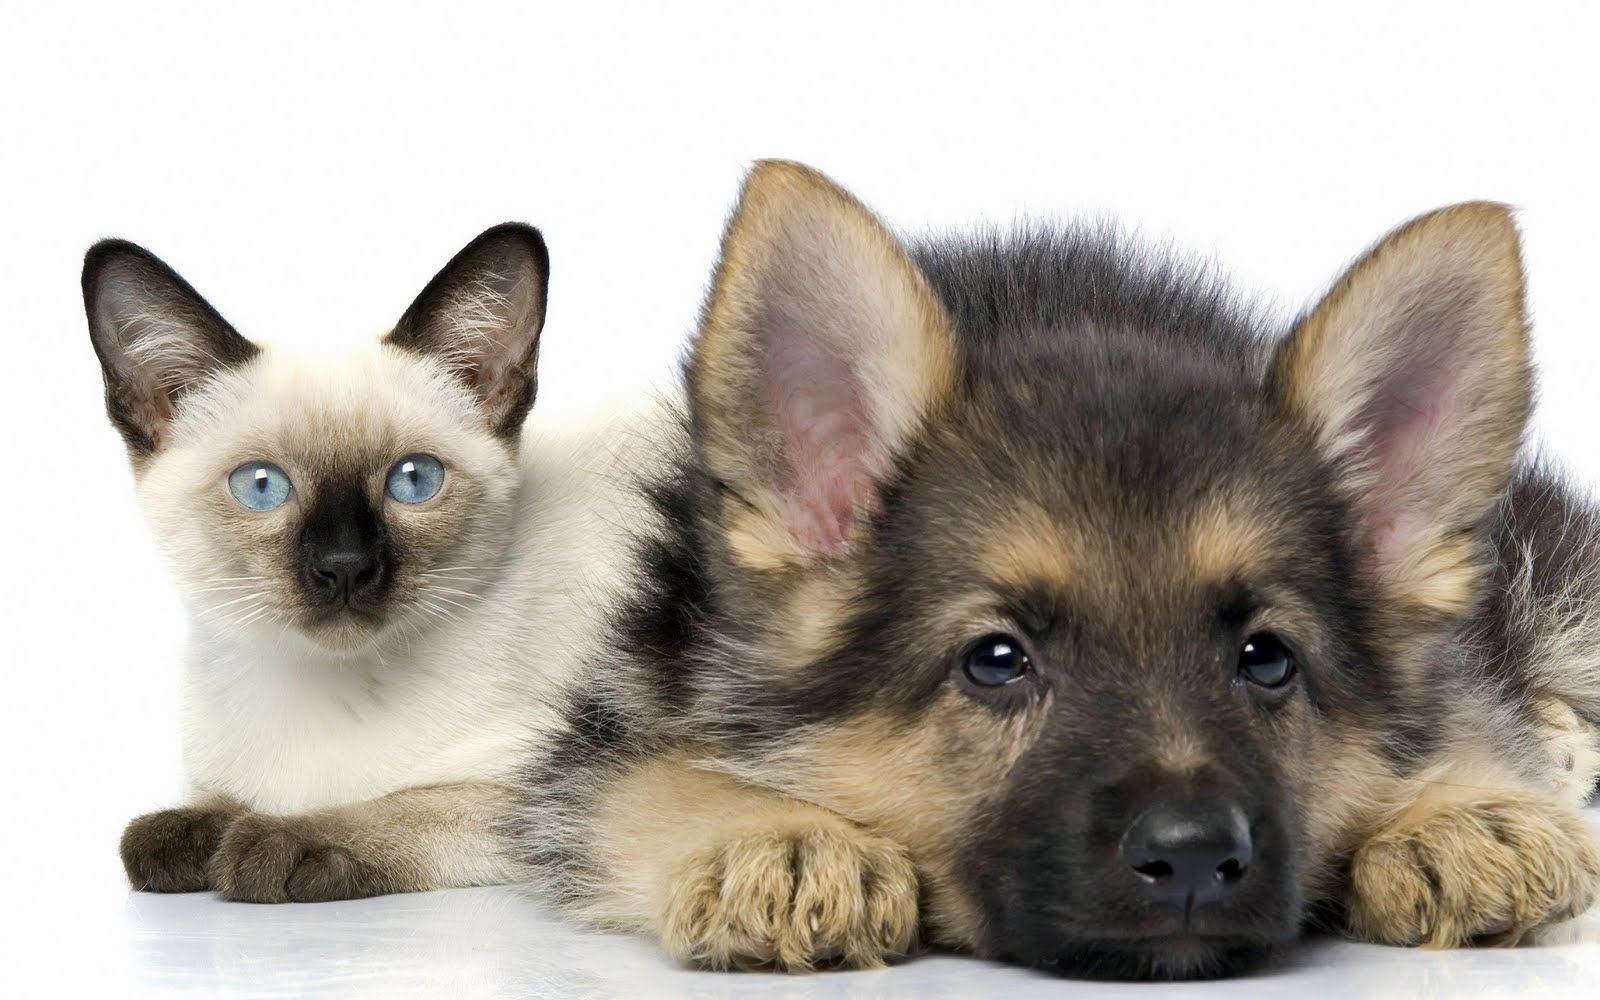 Animal Wallpaper: Dog and Cat. Cute cats and dogs, Dog cat picture, Cute animals